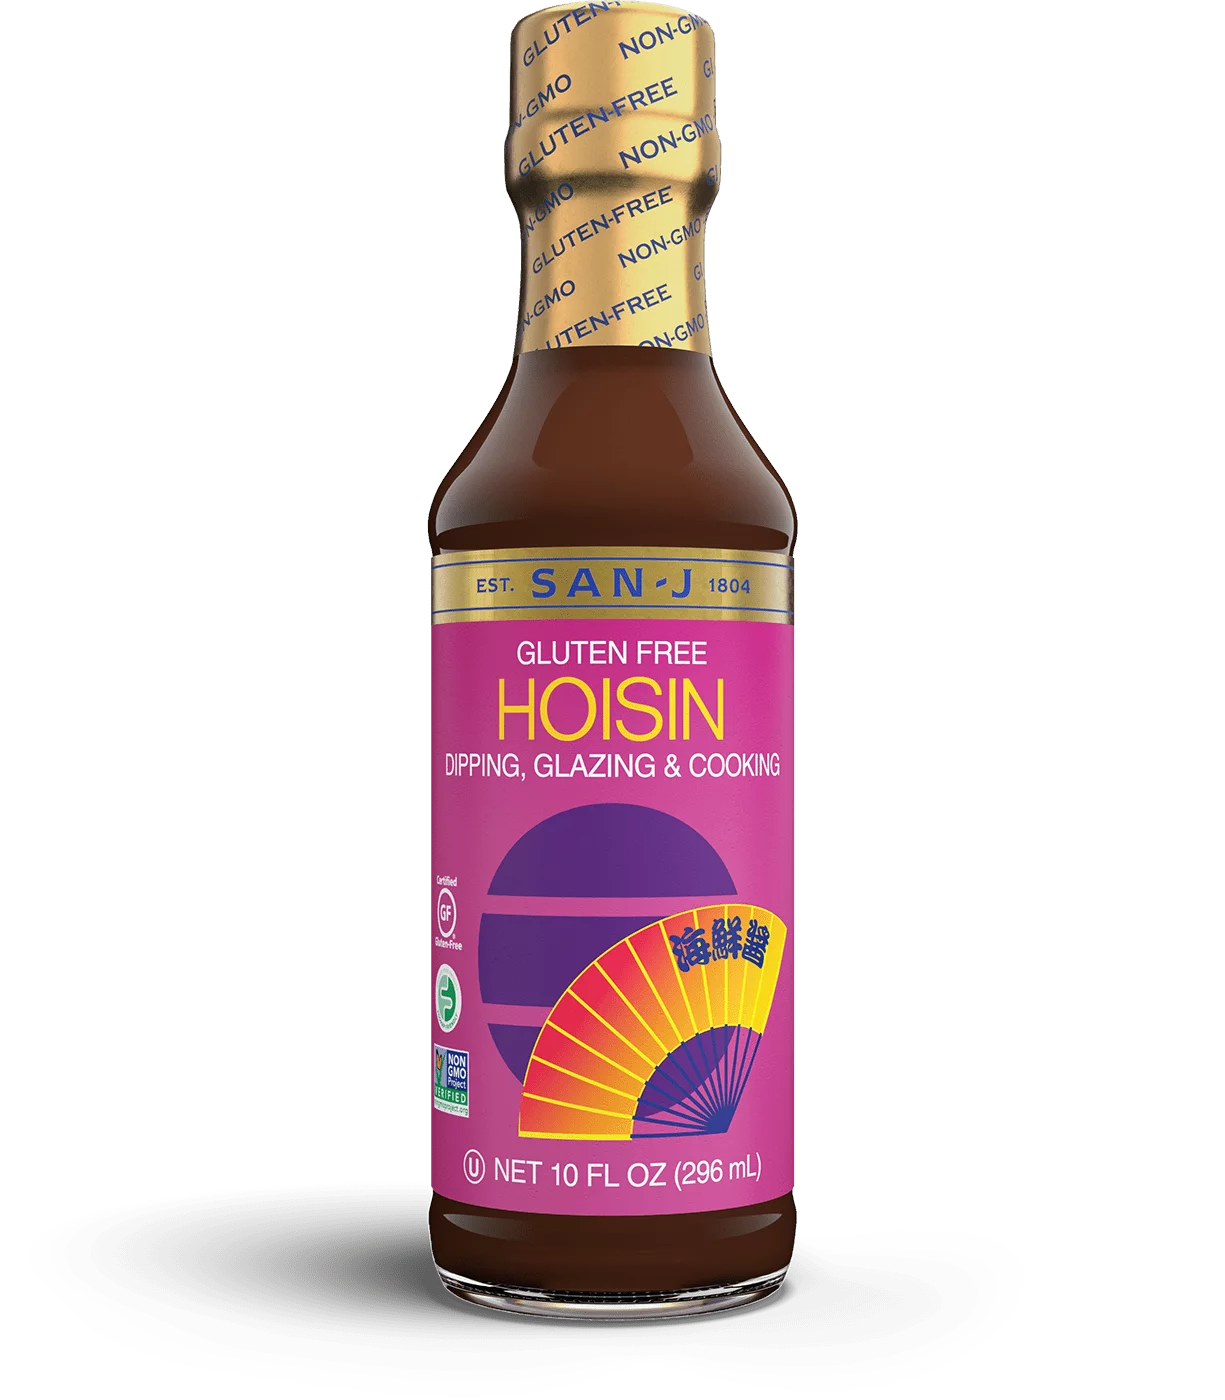 San j Hoisin cooking sauce is gluten free. Perfect for dripping, glazing & cooking.